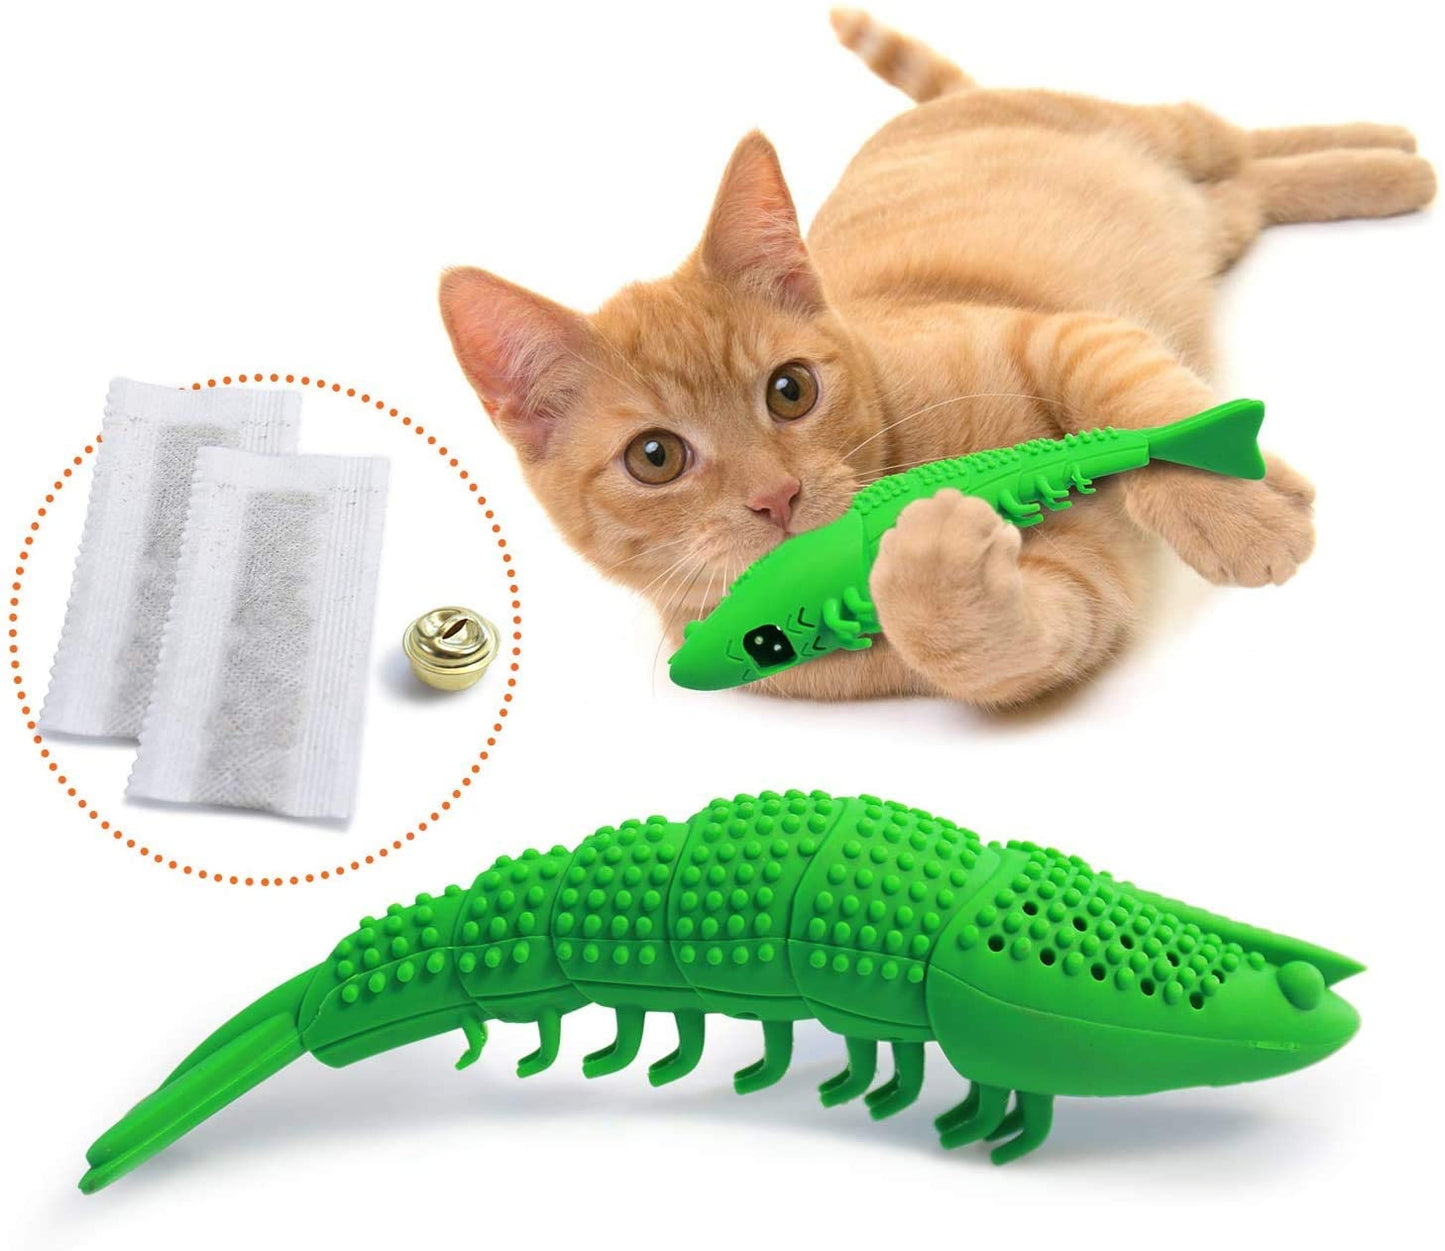 Cat toothbrush chew interactive toy for dental care, Cat Toothbrush Toy-Durable Hard Rubber - Cat Dental Care, Cat Interactive Toothbrush Chew Toy cat treat toy